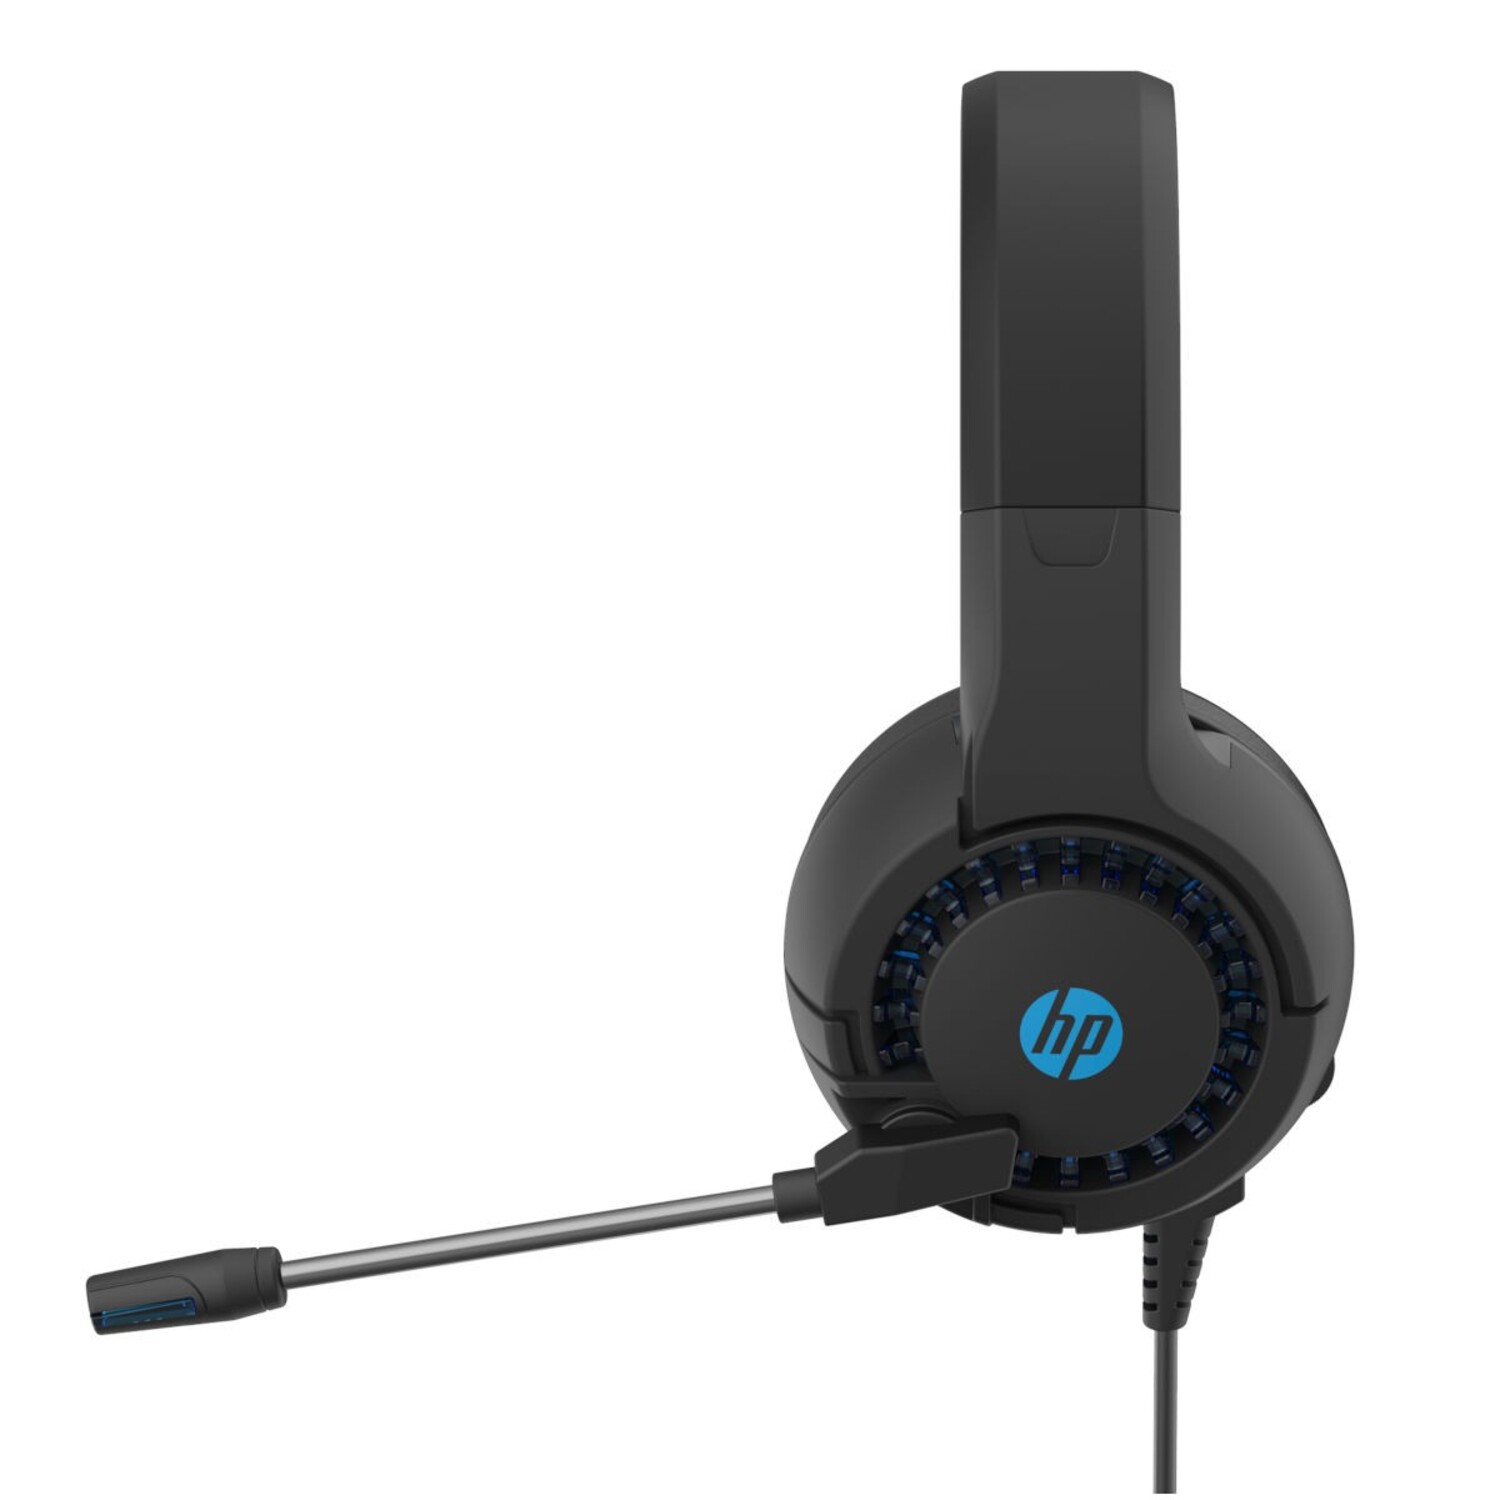 HP Stereo Gaming Headset For Smartphone PC 